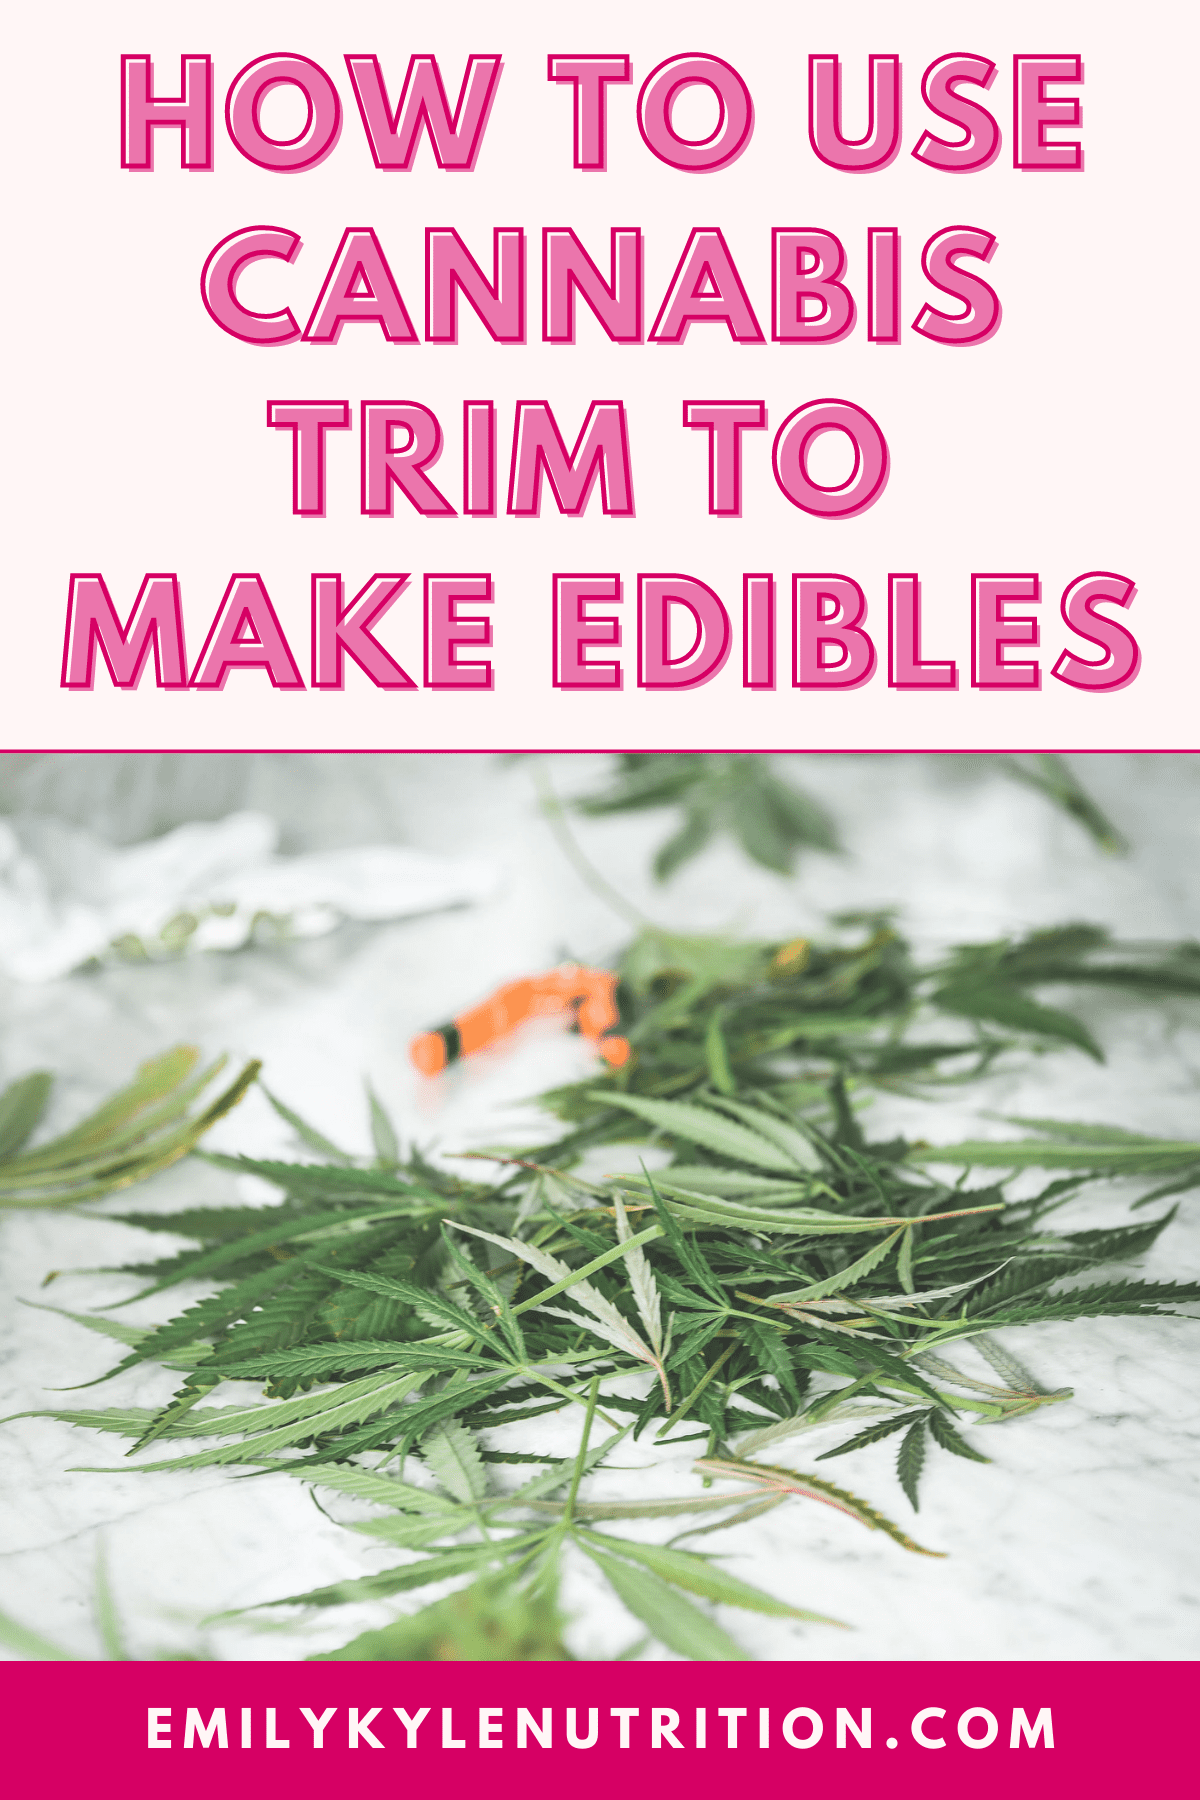 How to Use Cannabis Trim to Make Edibles graphic 